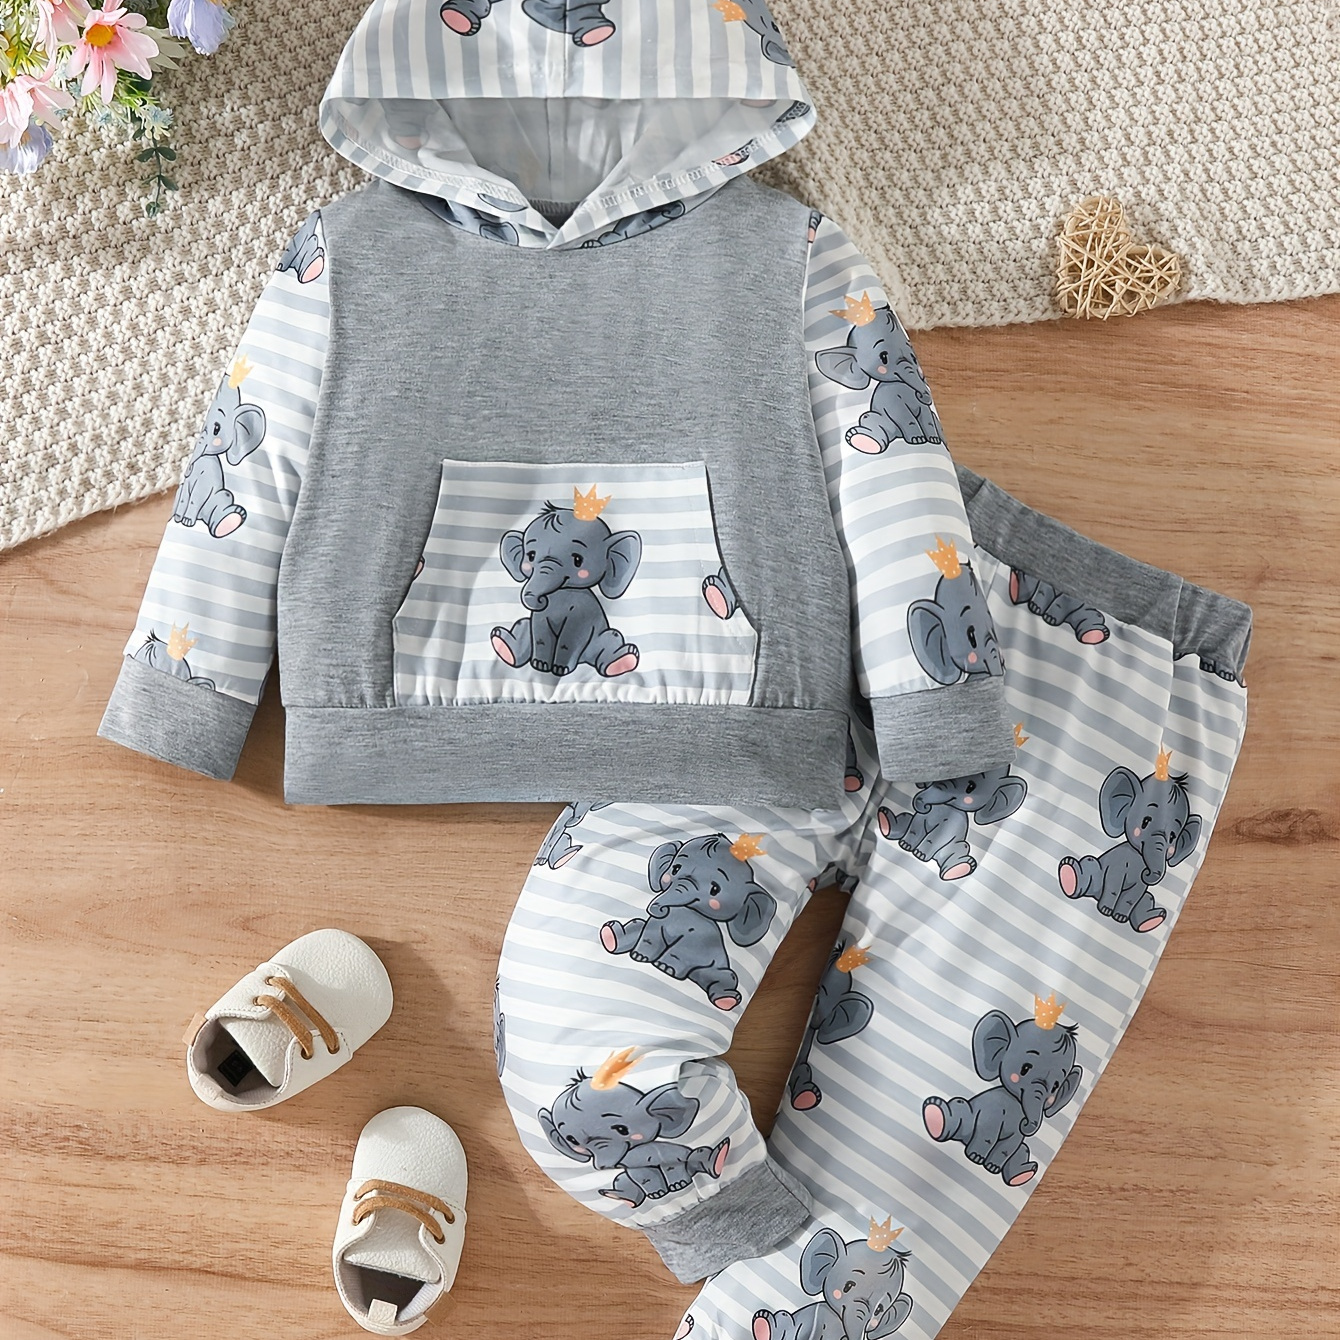 

Boys And Girls Baby Adorable Cartoon Elephant Print Hooded Top And Pants Set